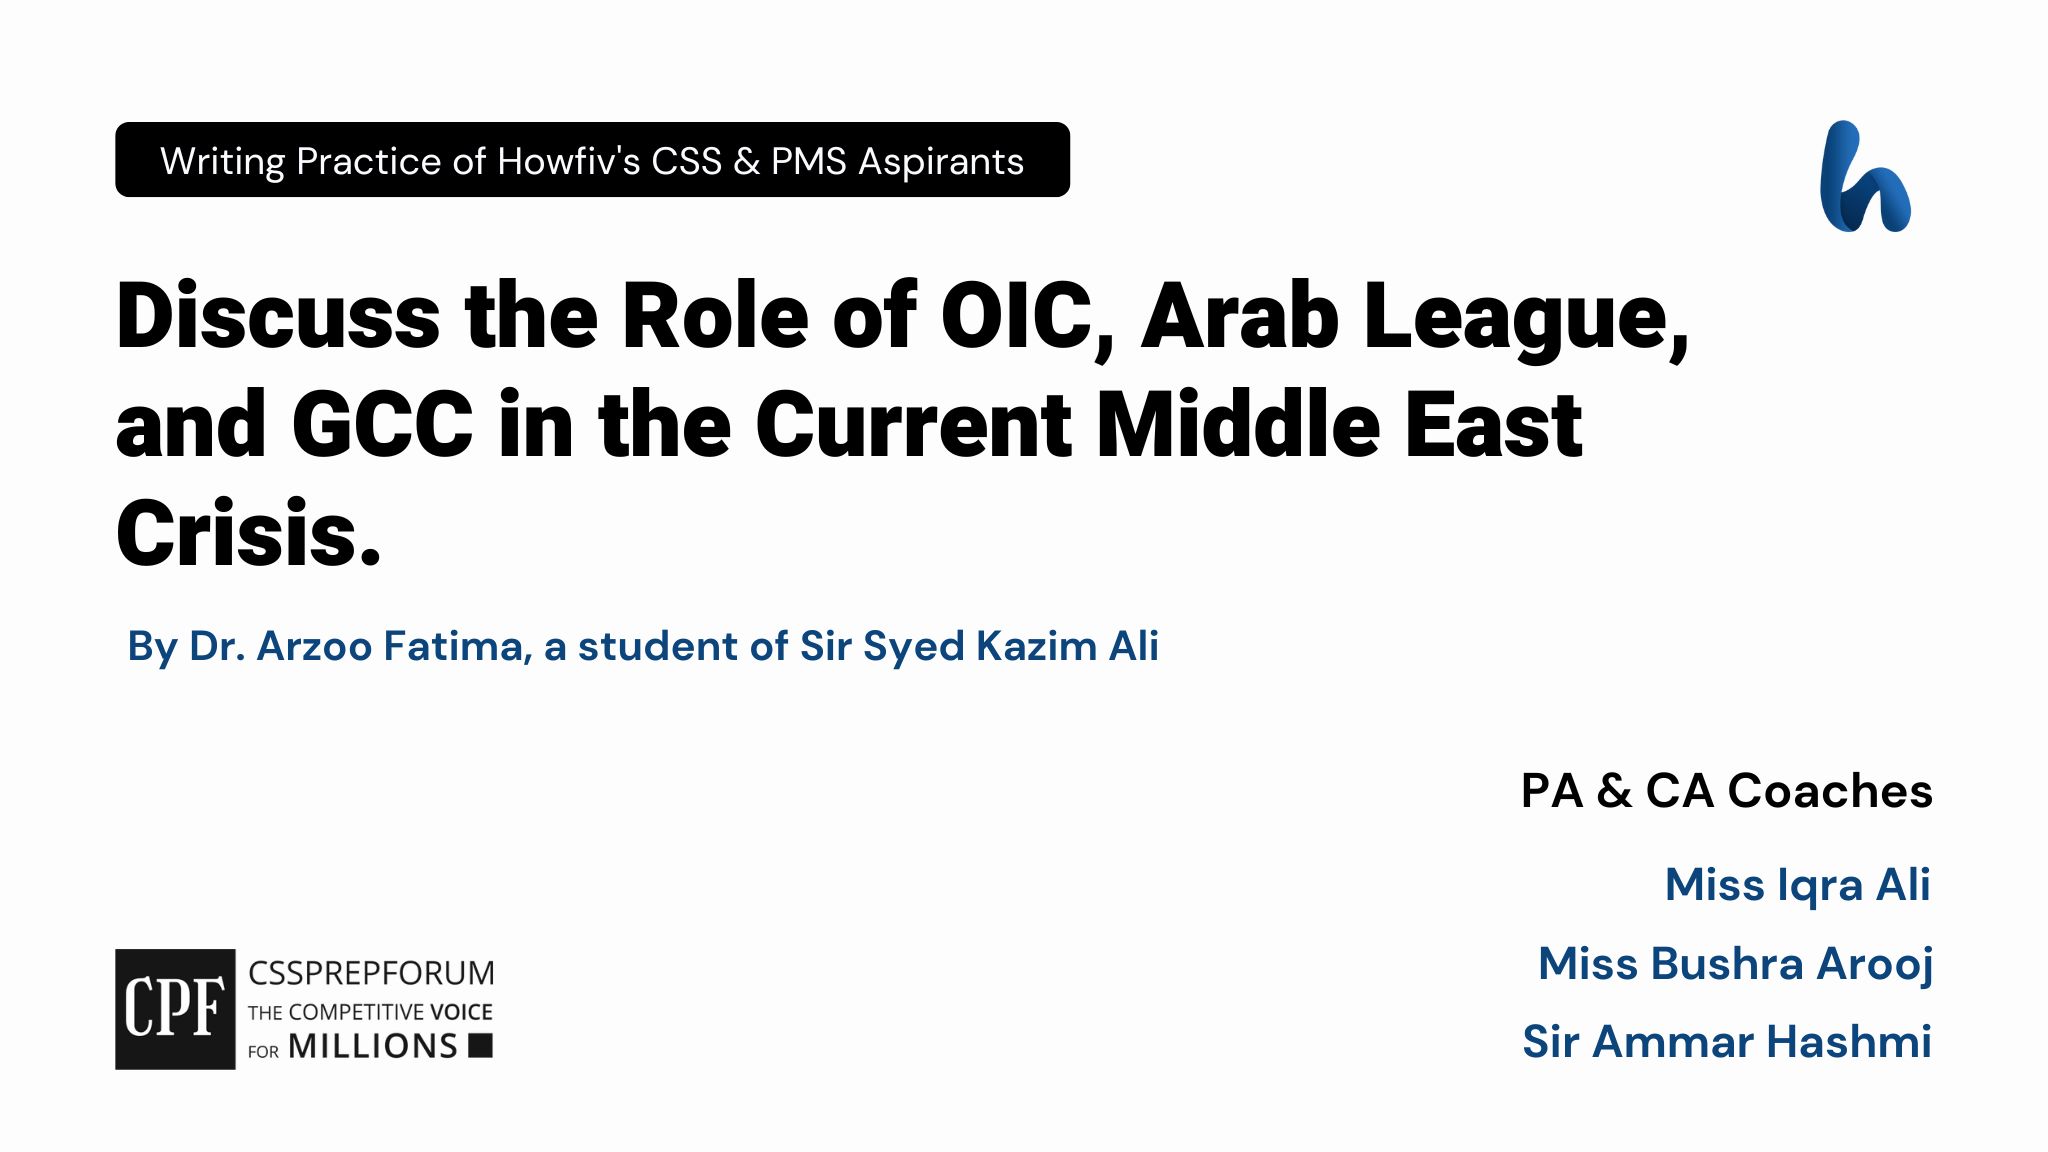 CSS Current Affairs article | Role of OIC, Arab League, and GCC in the Middle East | is written by Dr. Arzoo Fatime under the supervision of Sir Ammar Hashmi...